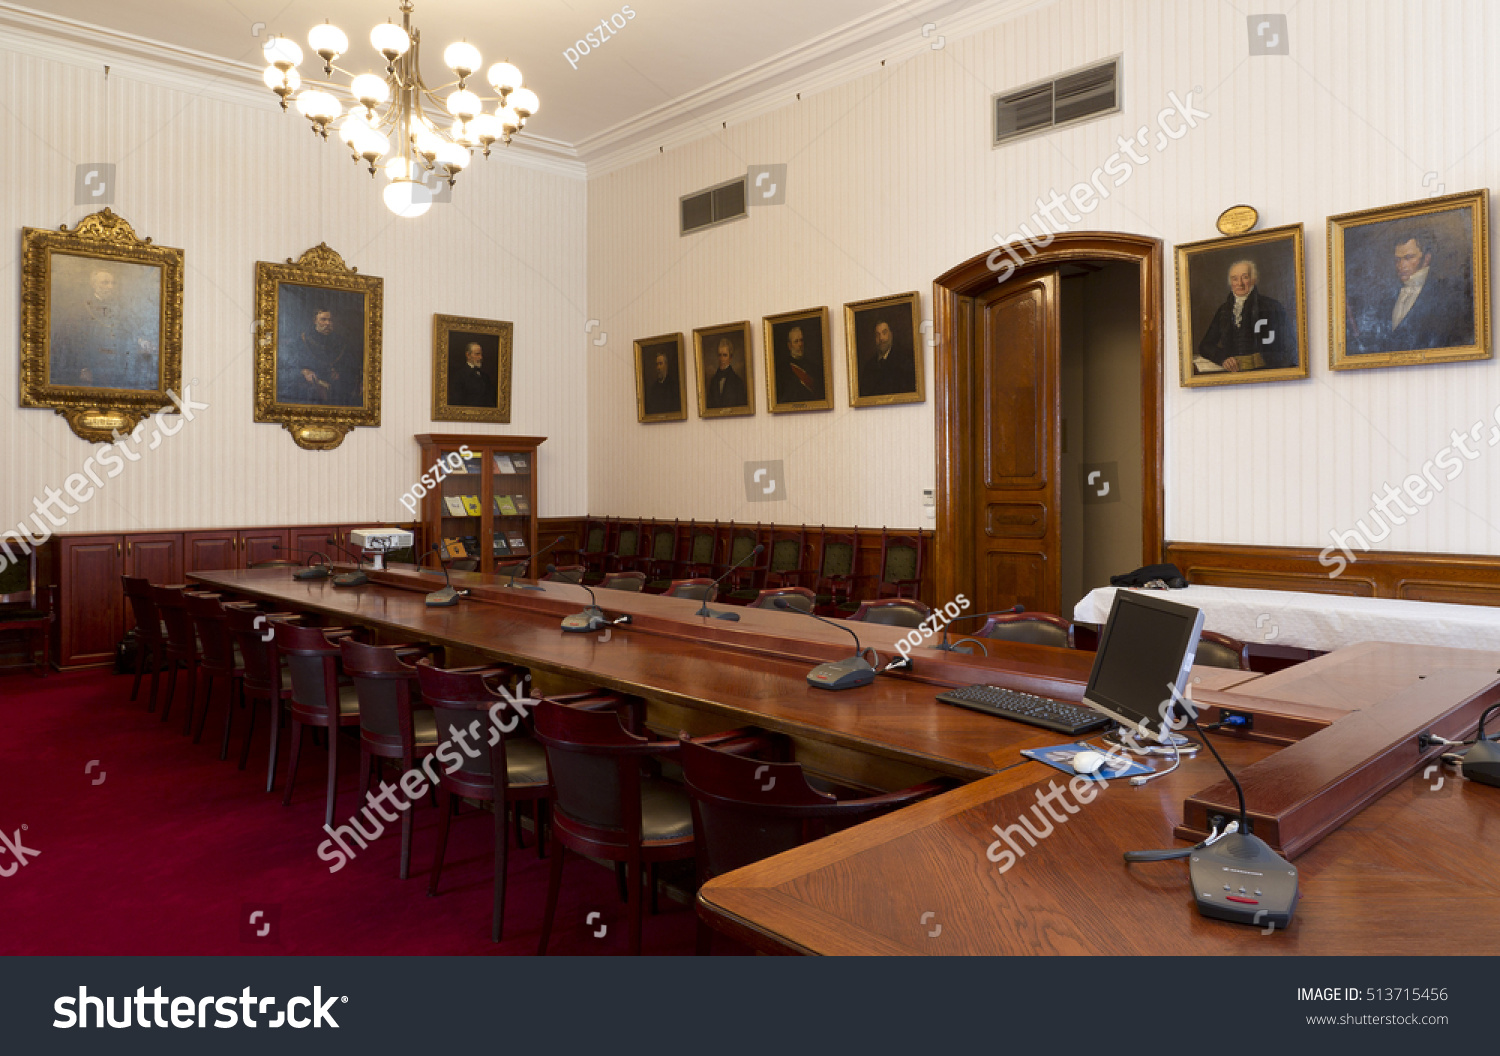 Budapest Hungary May 14 Conference Room Stock Photo 513715456